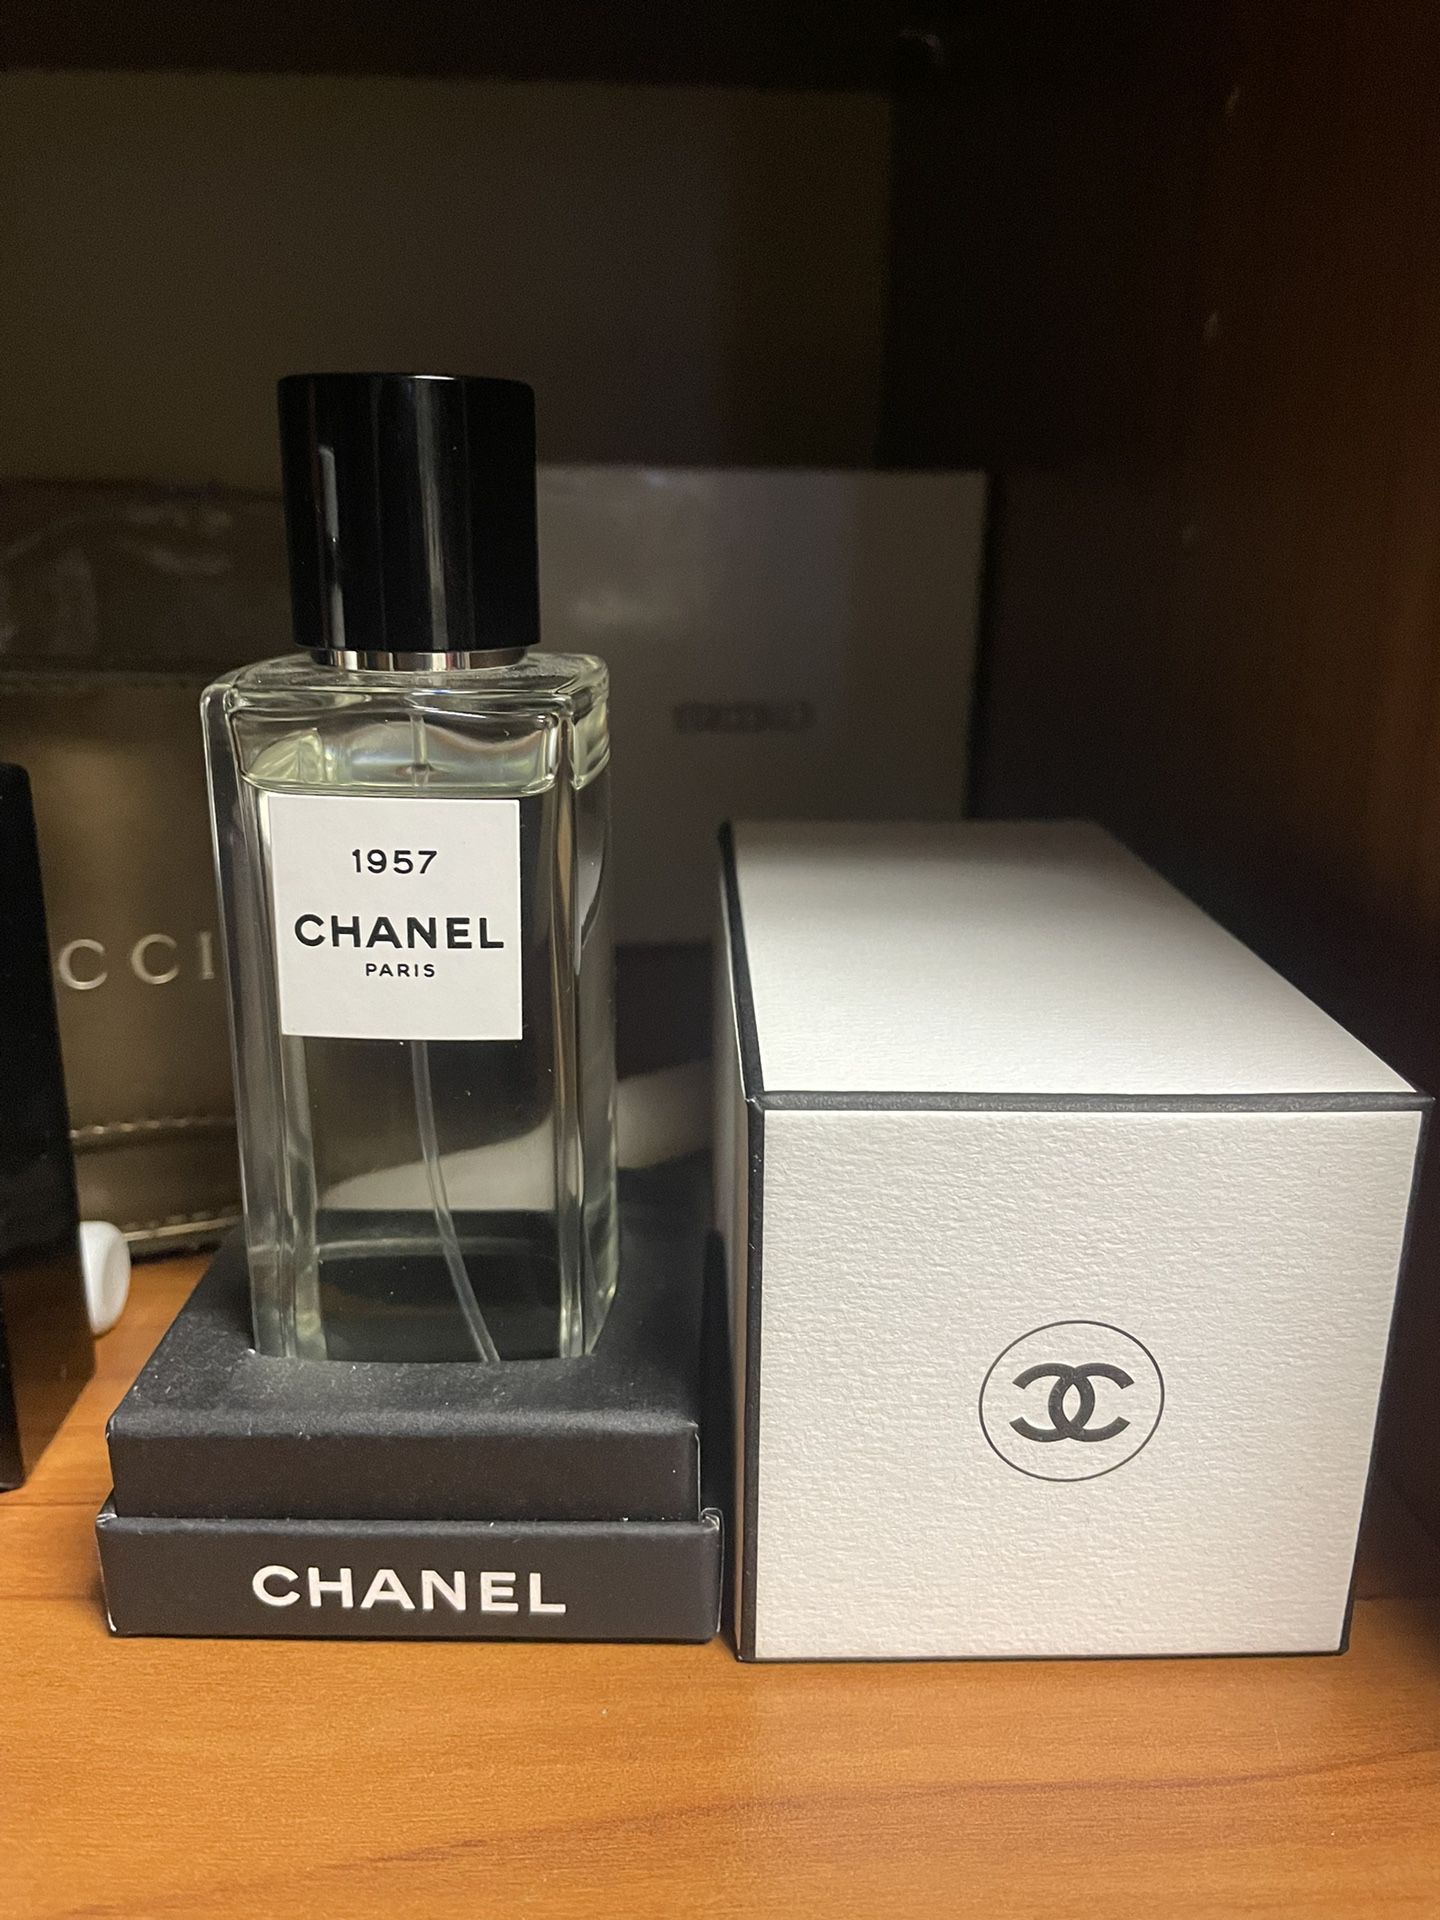 A new exclusive perfume: CHANEL 1957 